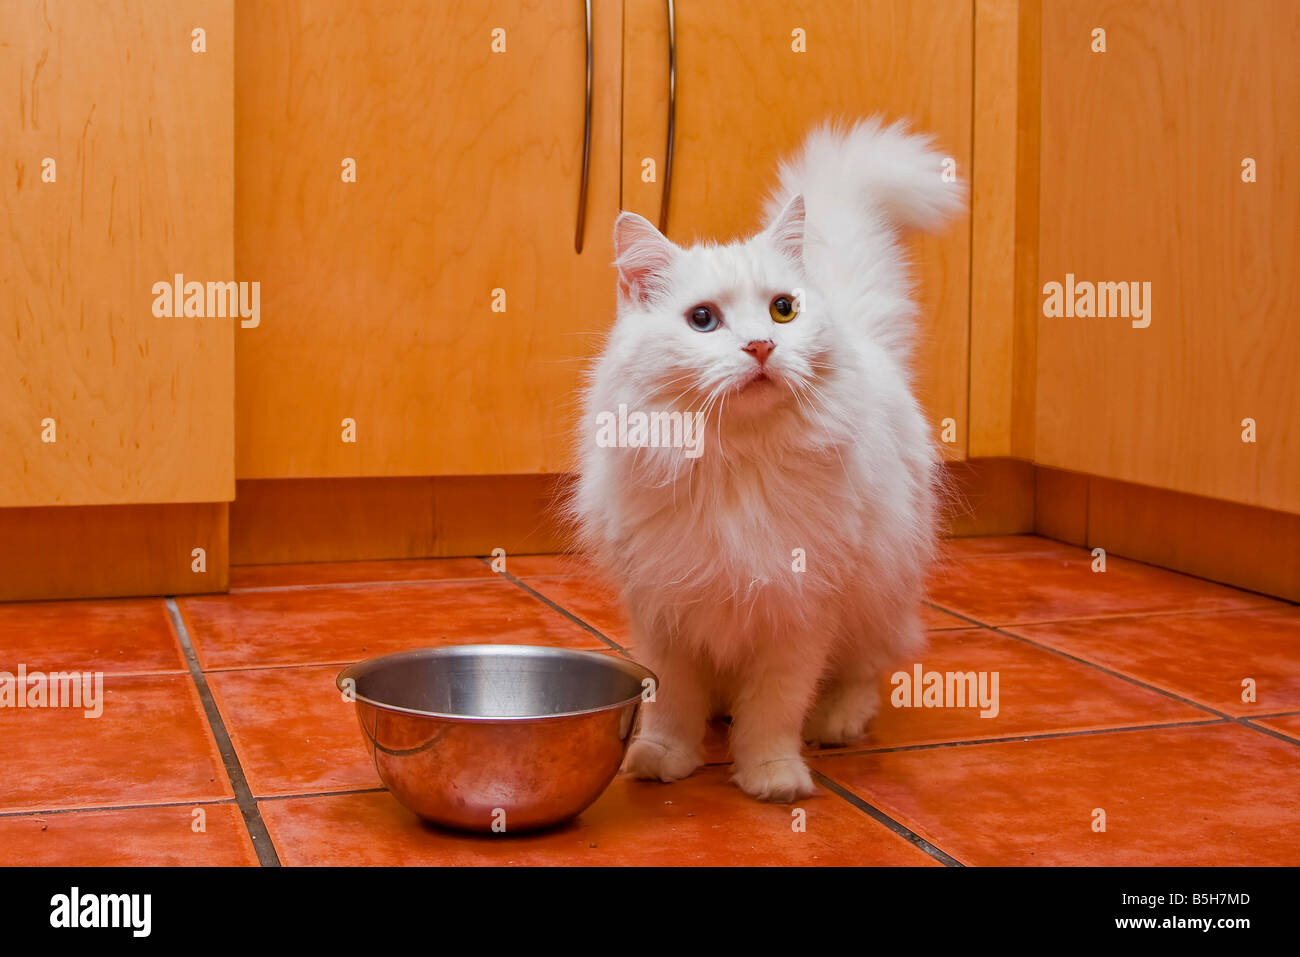 A white cat with medium long hair like a Persian or Ragamuffin breed elegantly waiting to be fed in the kitchen Stock Photo